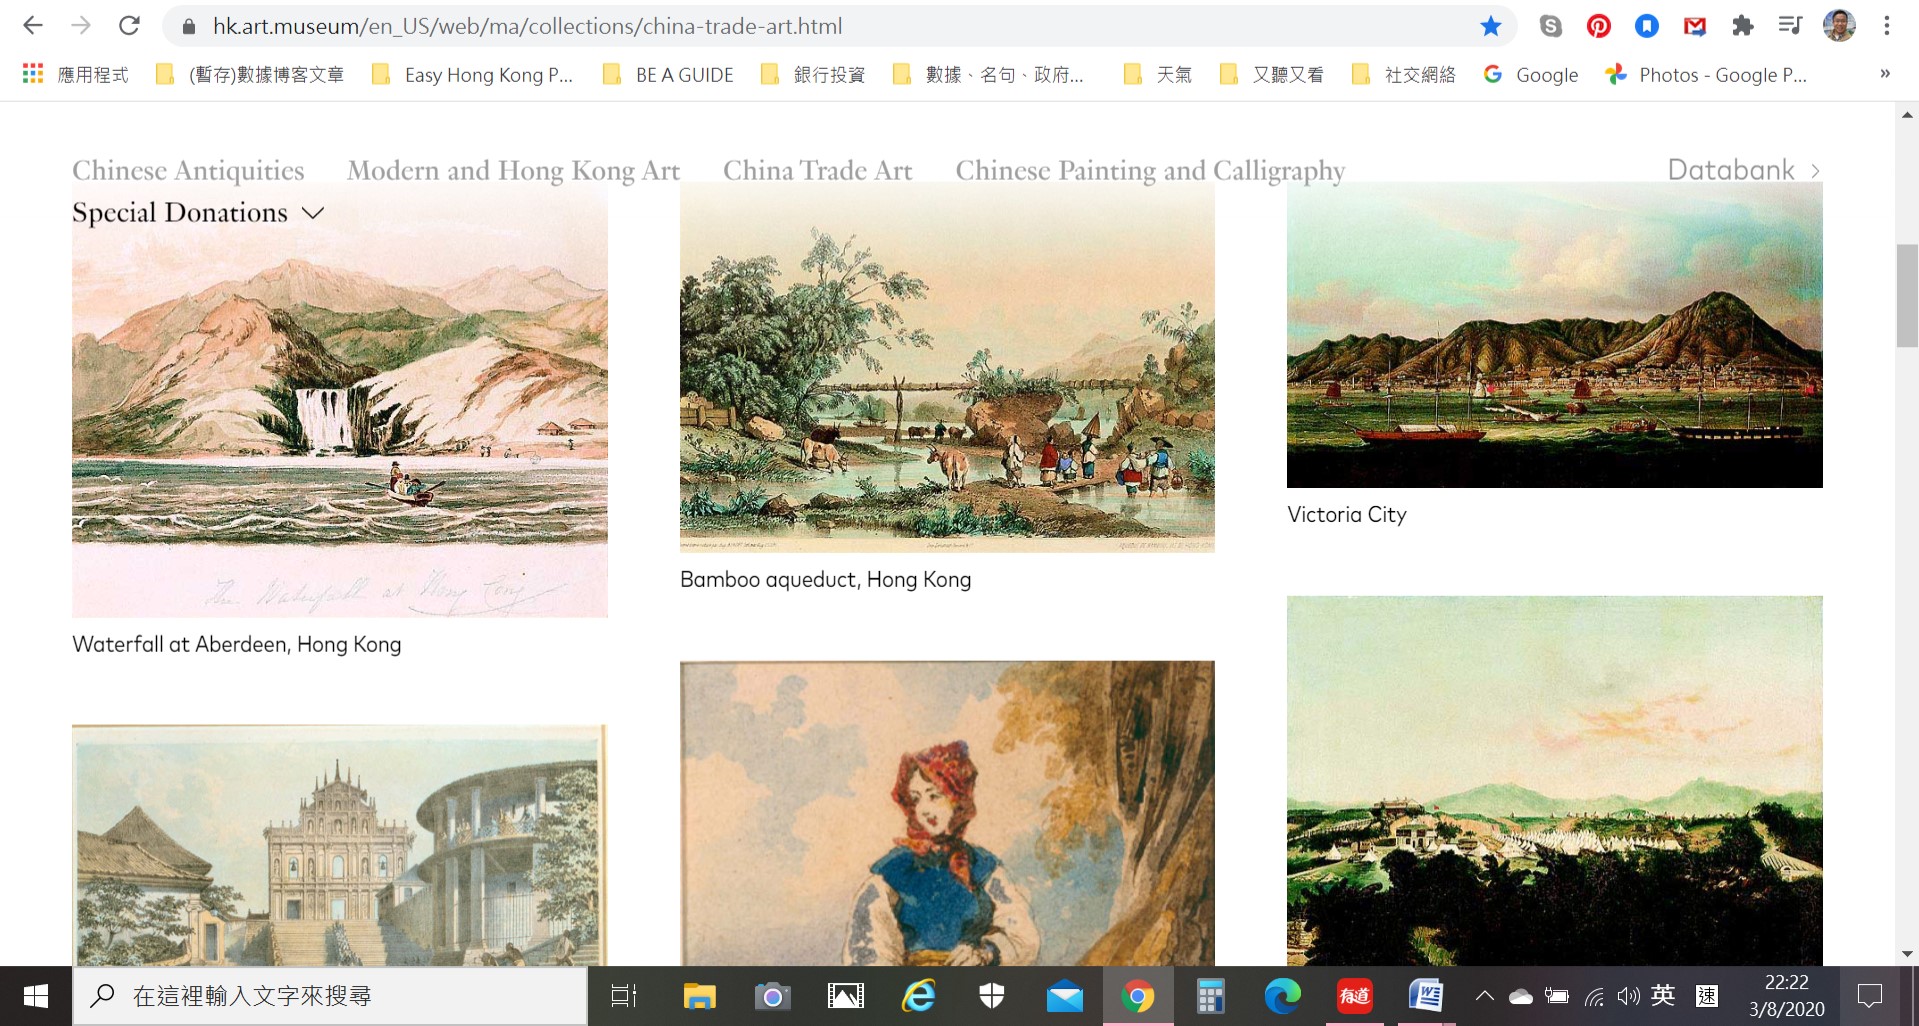 Online exhibition page for China trade art of Hong Kong Museum of Art